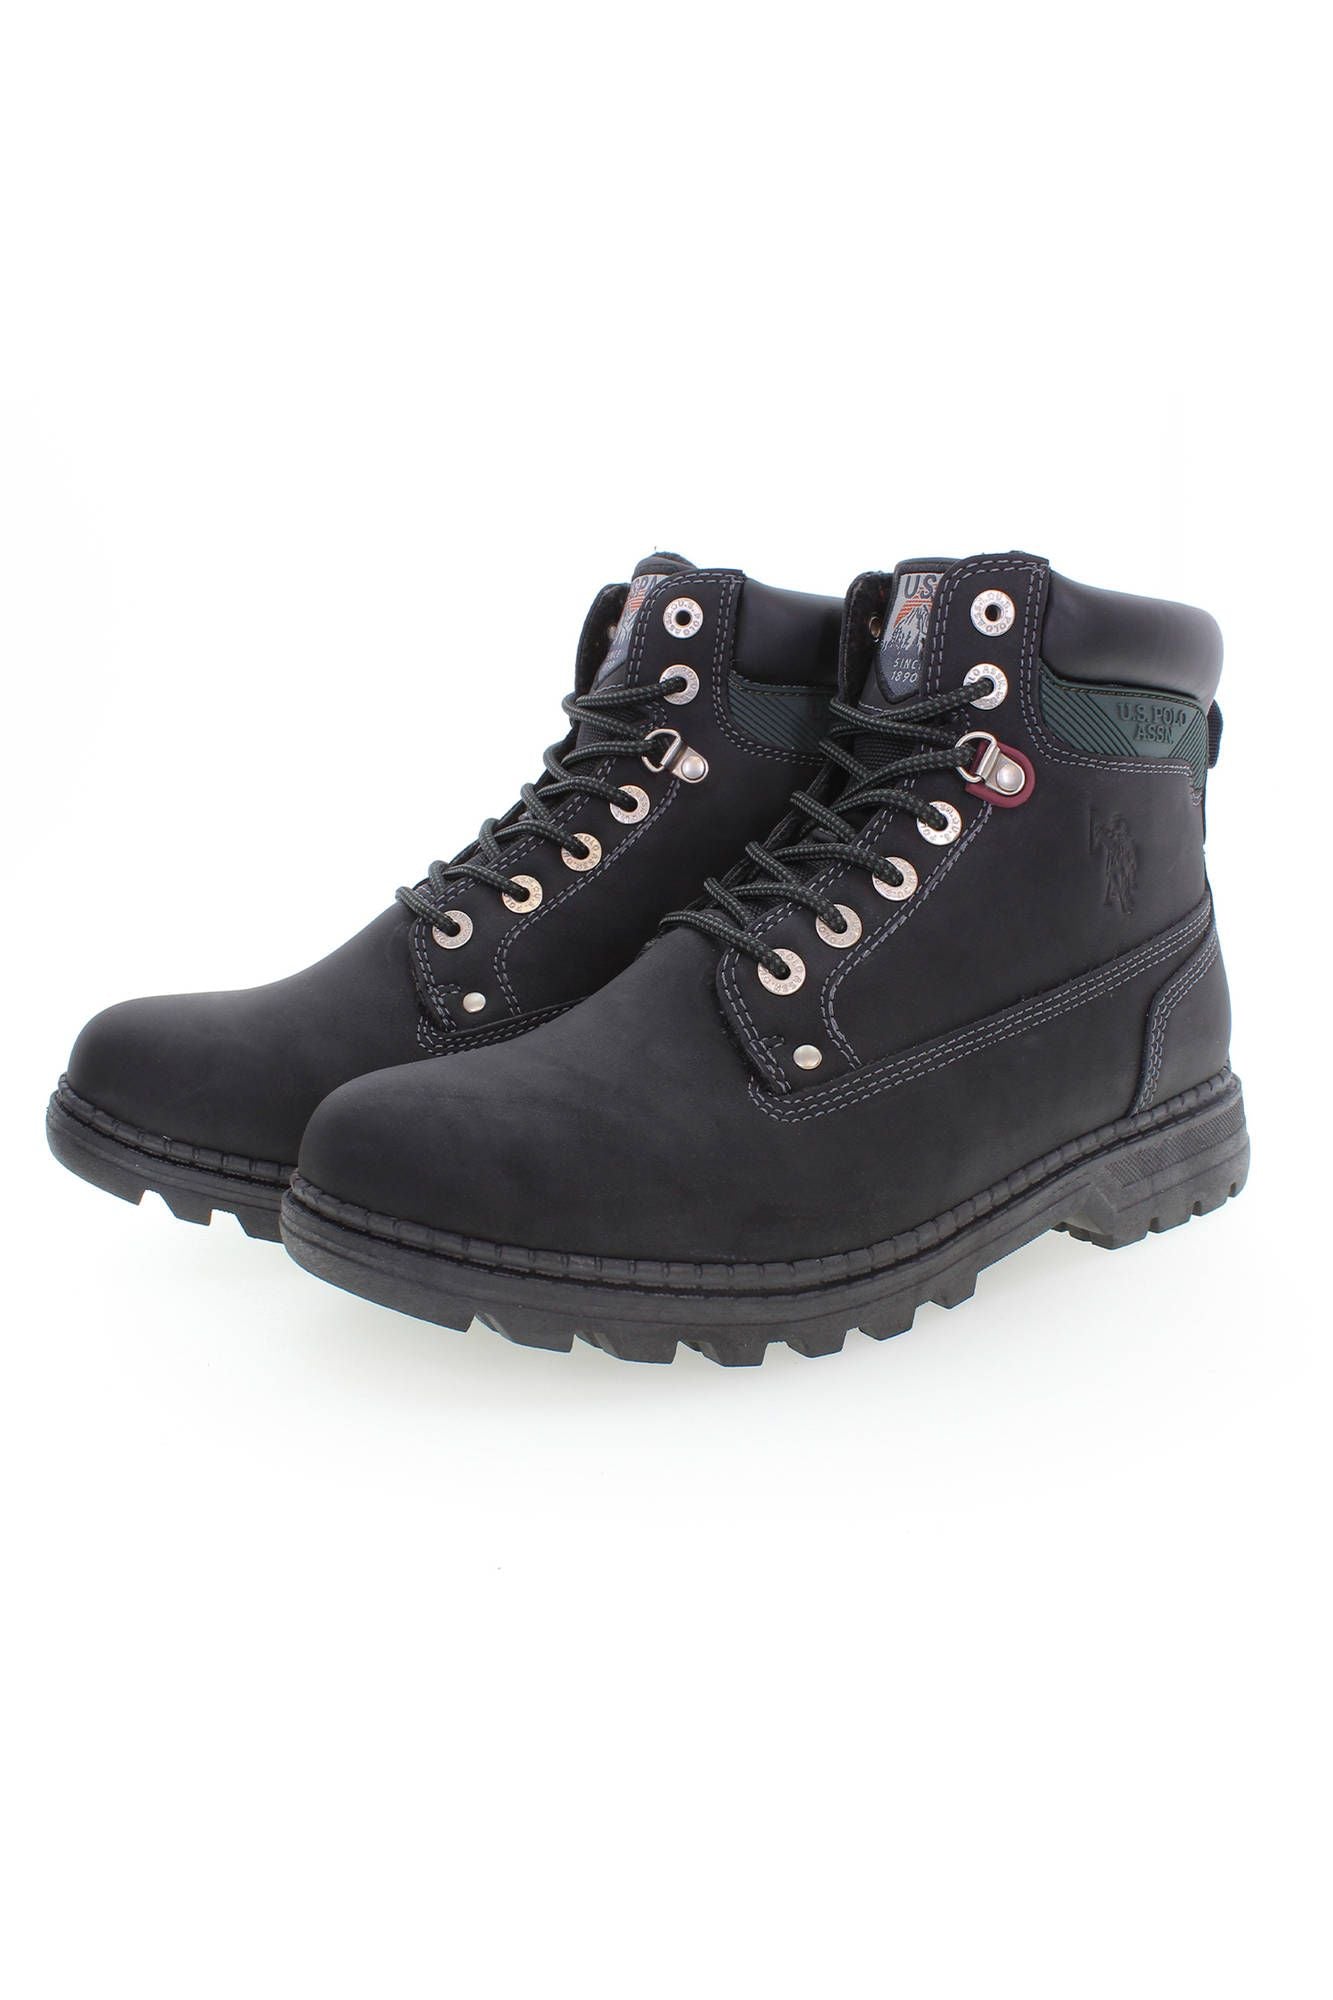 U.S. POLO ASSN. Equestrian Chic Lace-Up High Boots